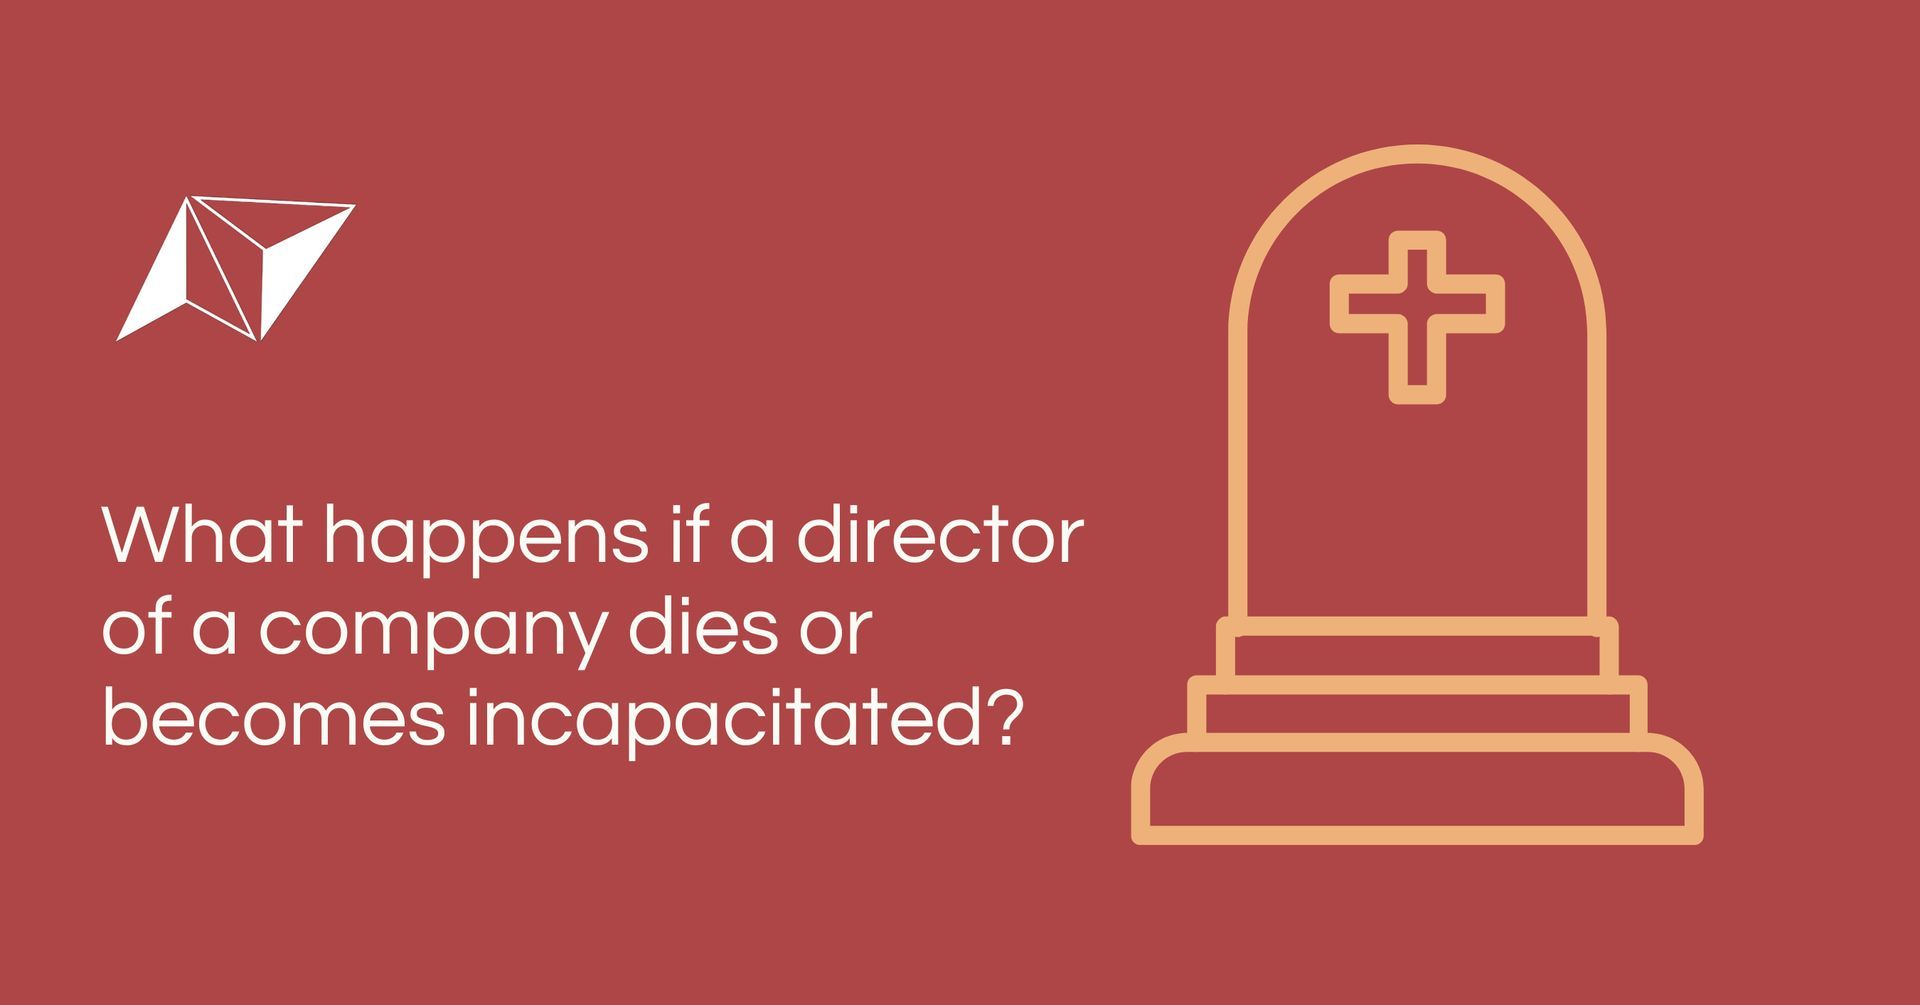 What happens if a director of a company dies or becomes incapacitated?